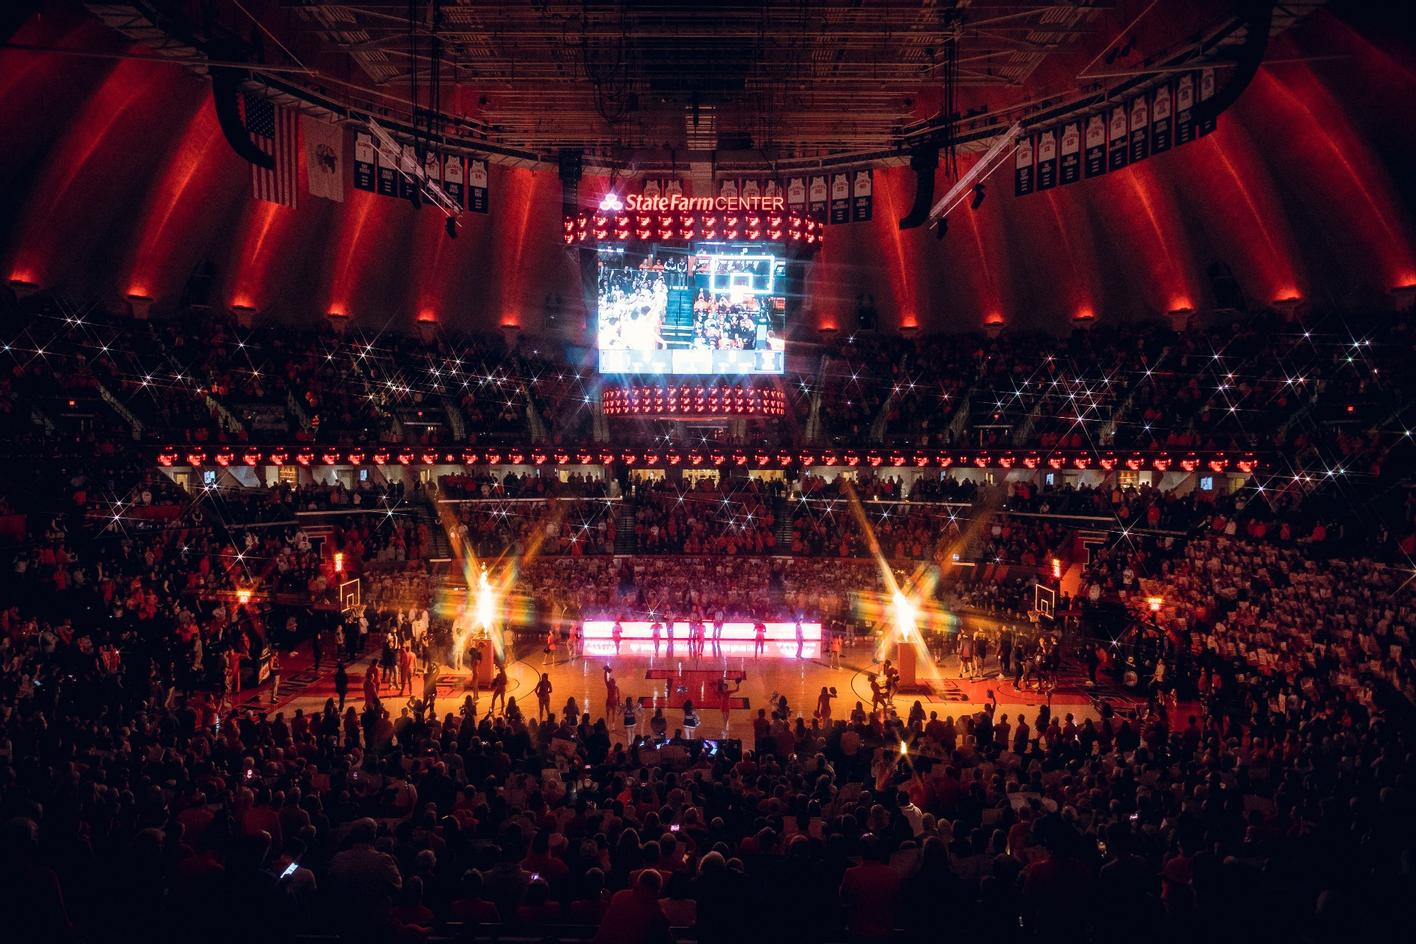 State Farm Center, full to capacity, during a post-game awards ceremony